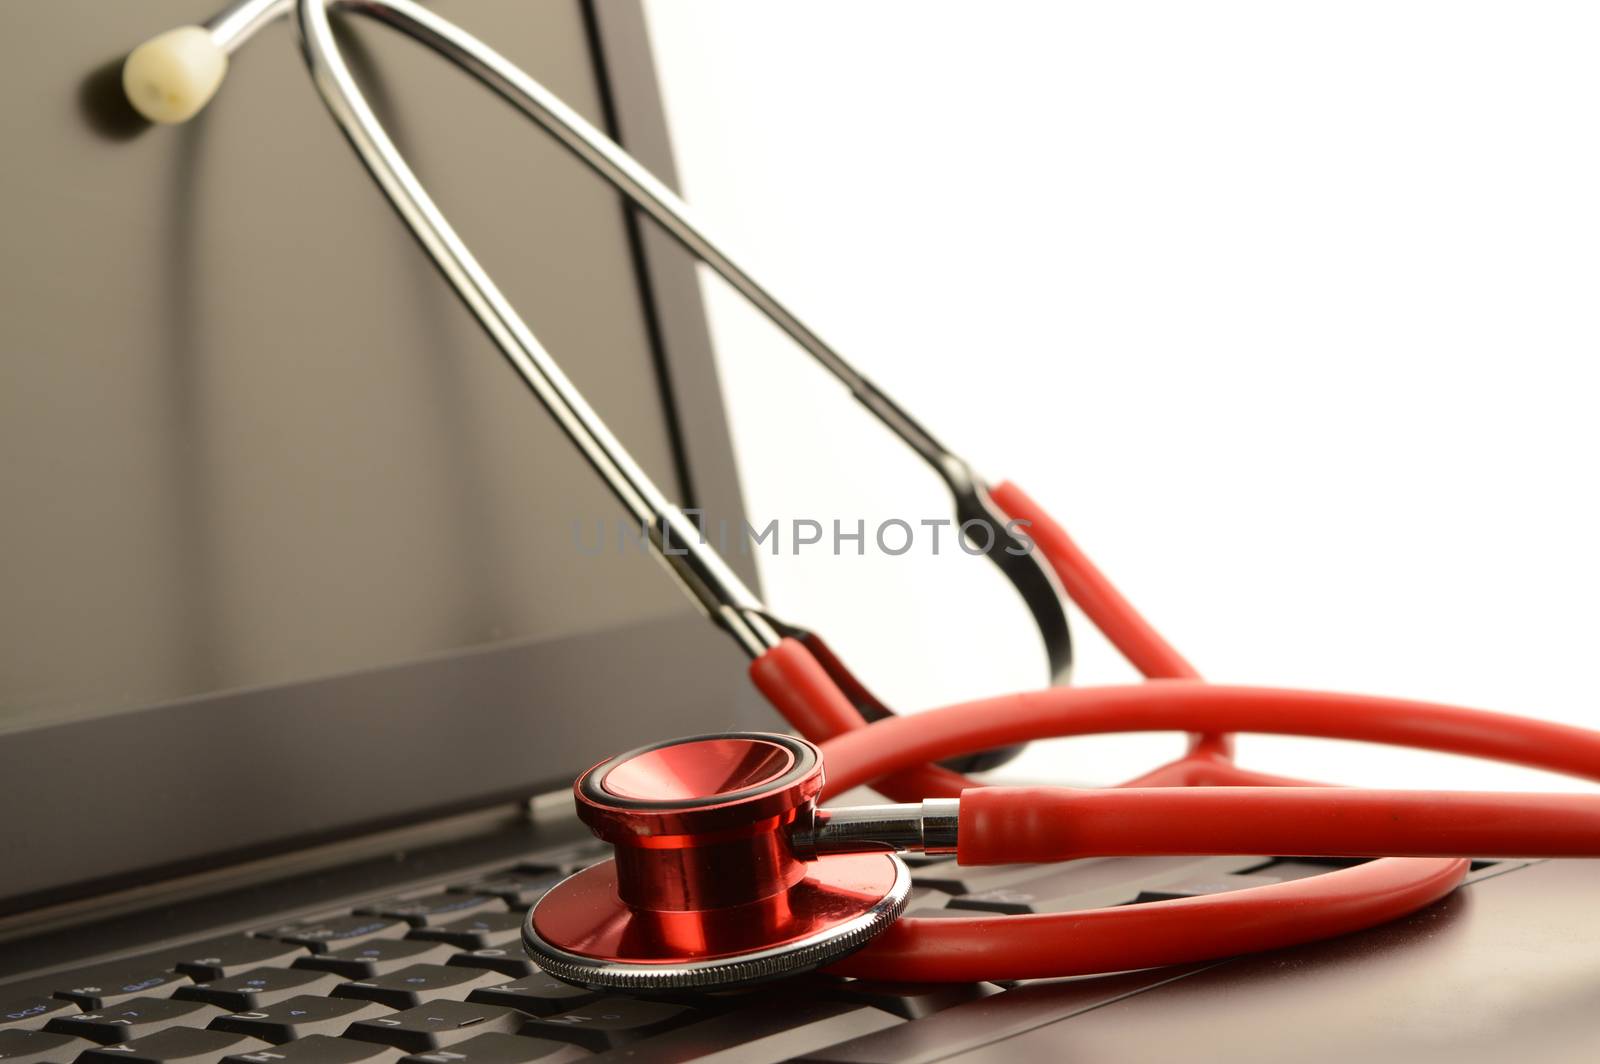 A stethoscope on a laptop for online healthcare services.